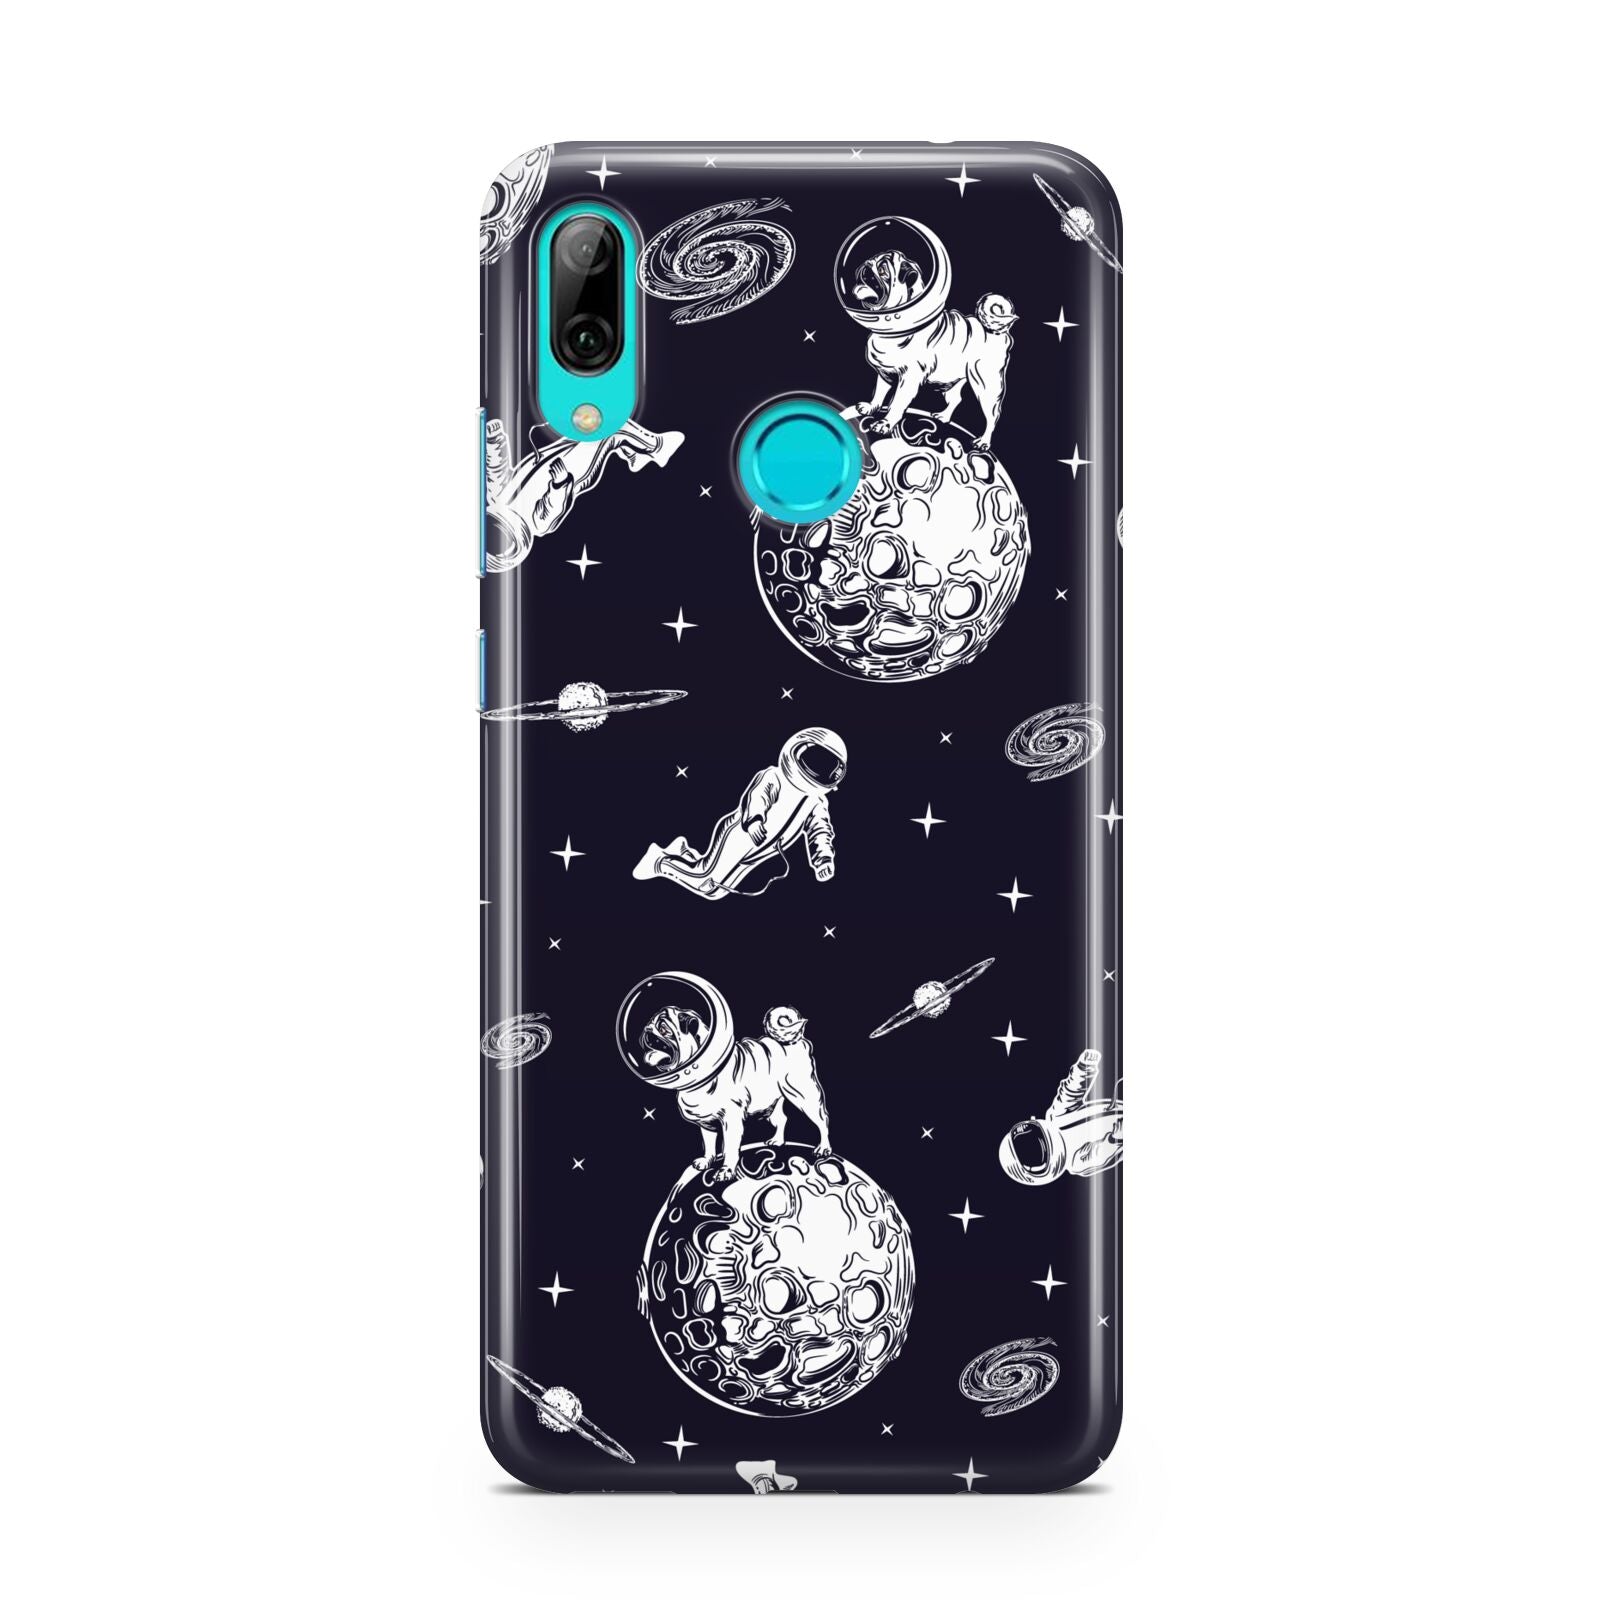 Pug in Space Huawei P Smart 2019 Case